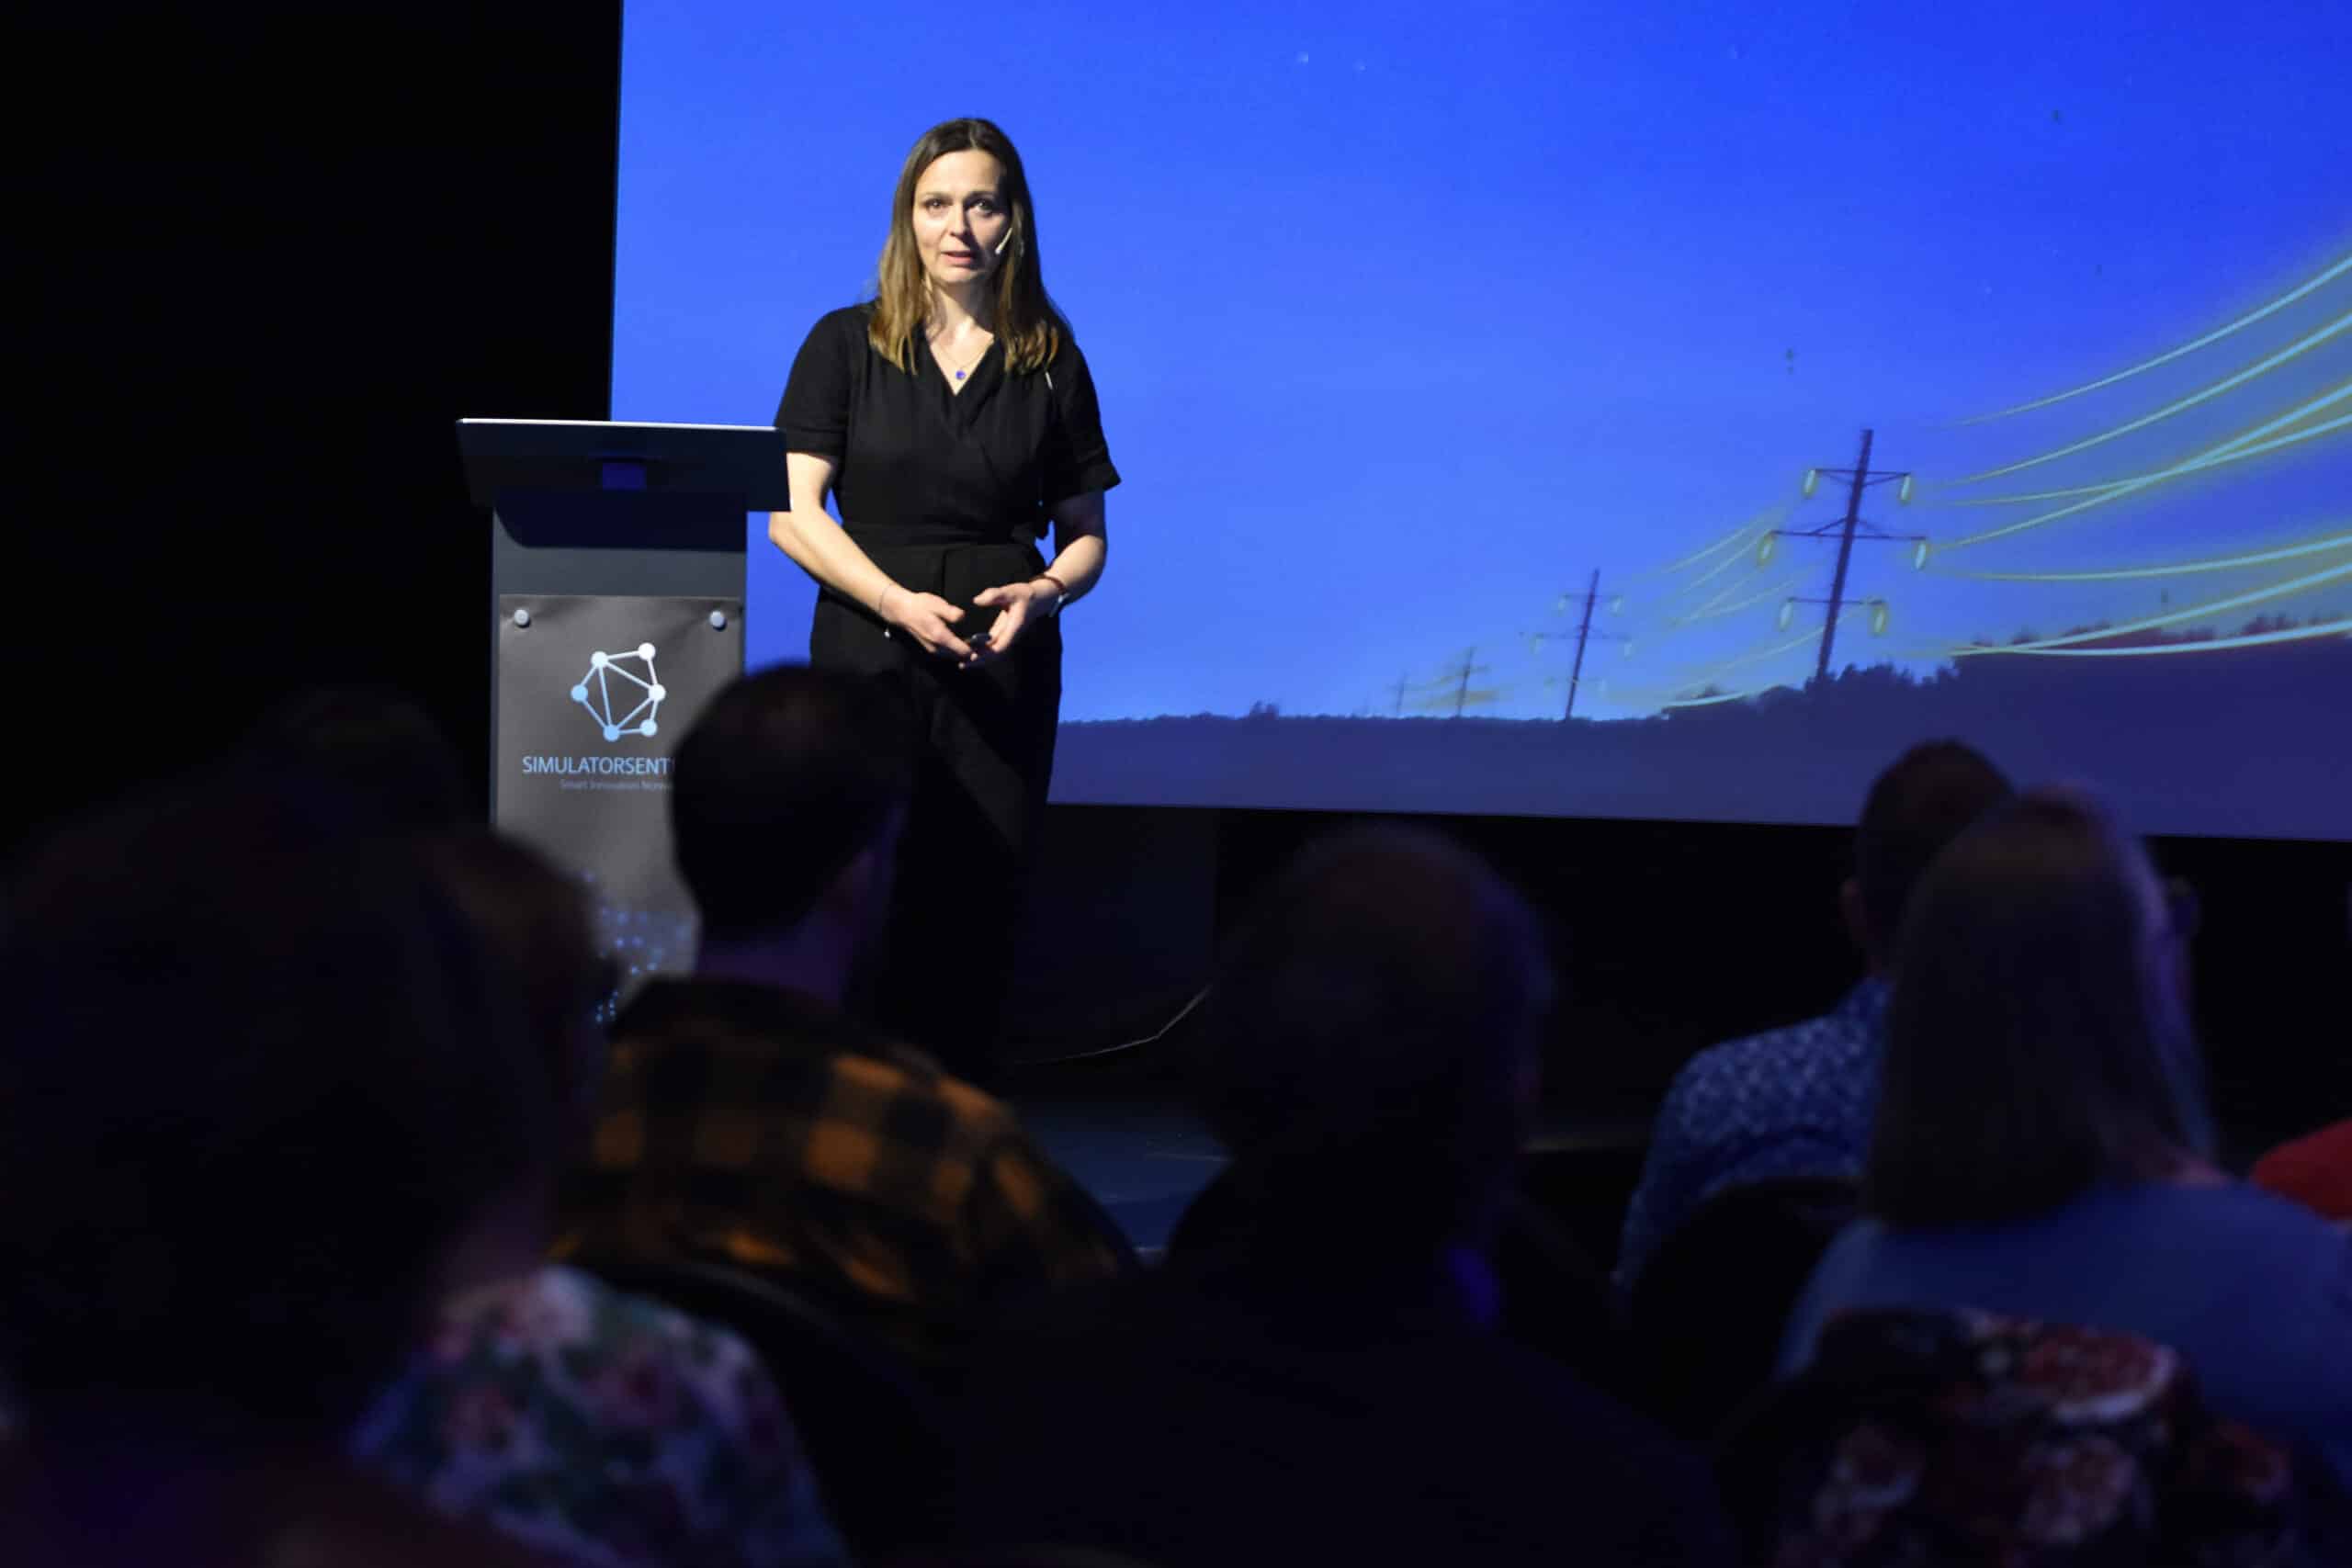 Vivi Mathiesen, Heimdall Power, on stage in the Smart Innovation Arena during the energy seminar on June 1, 2023.